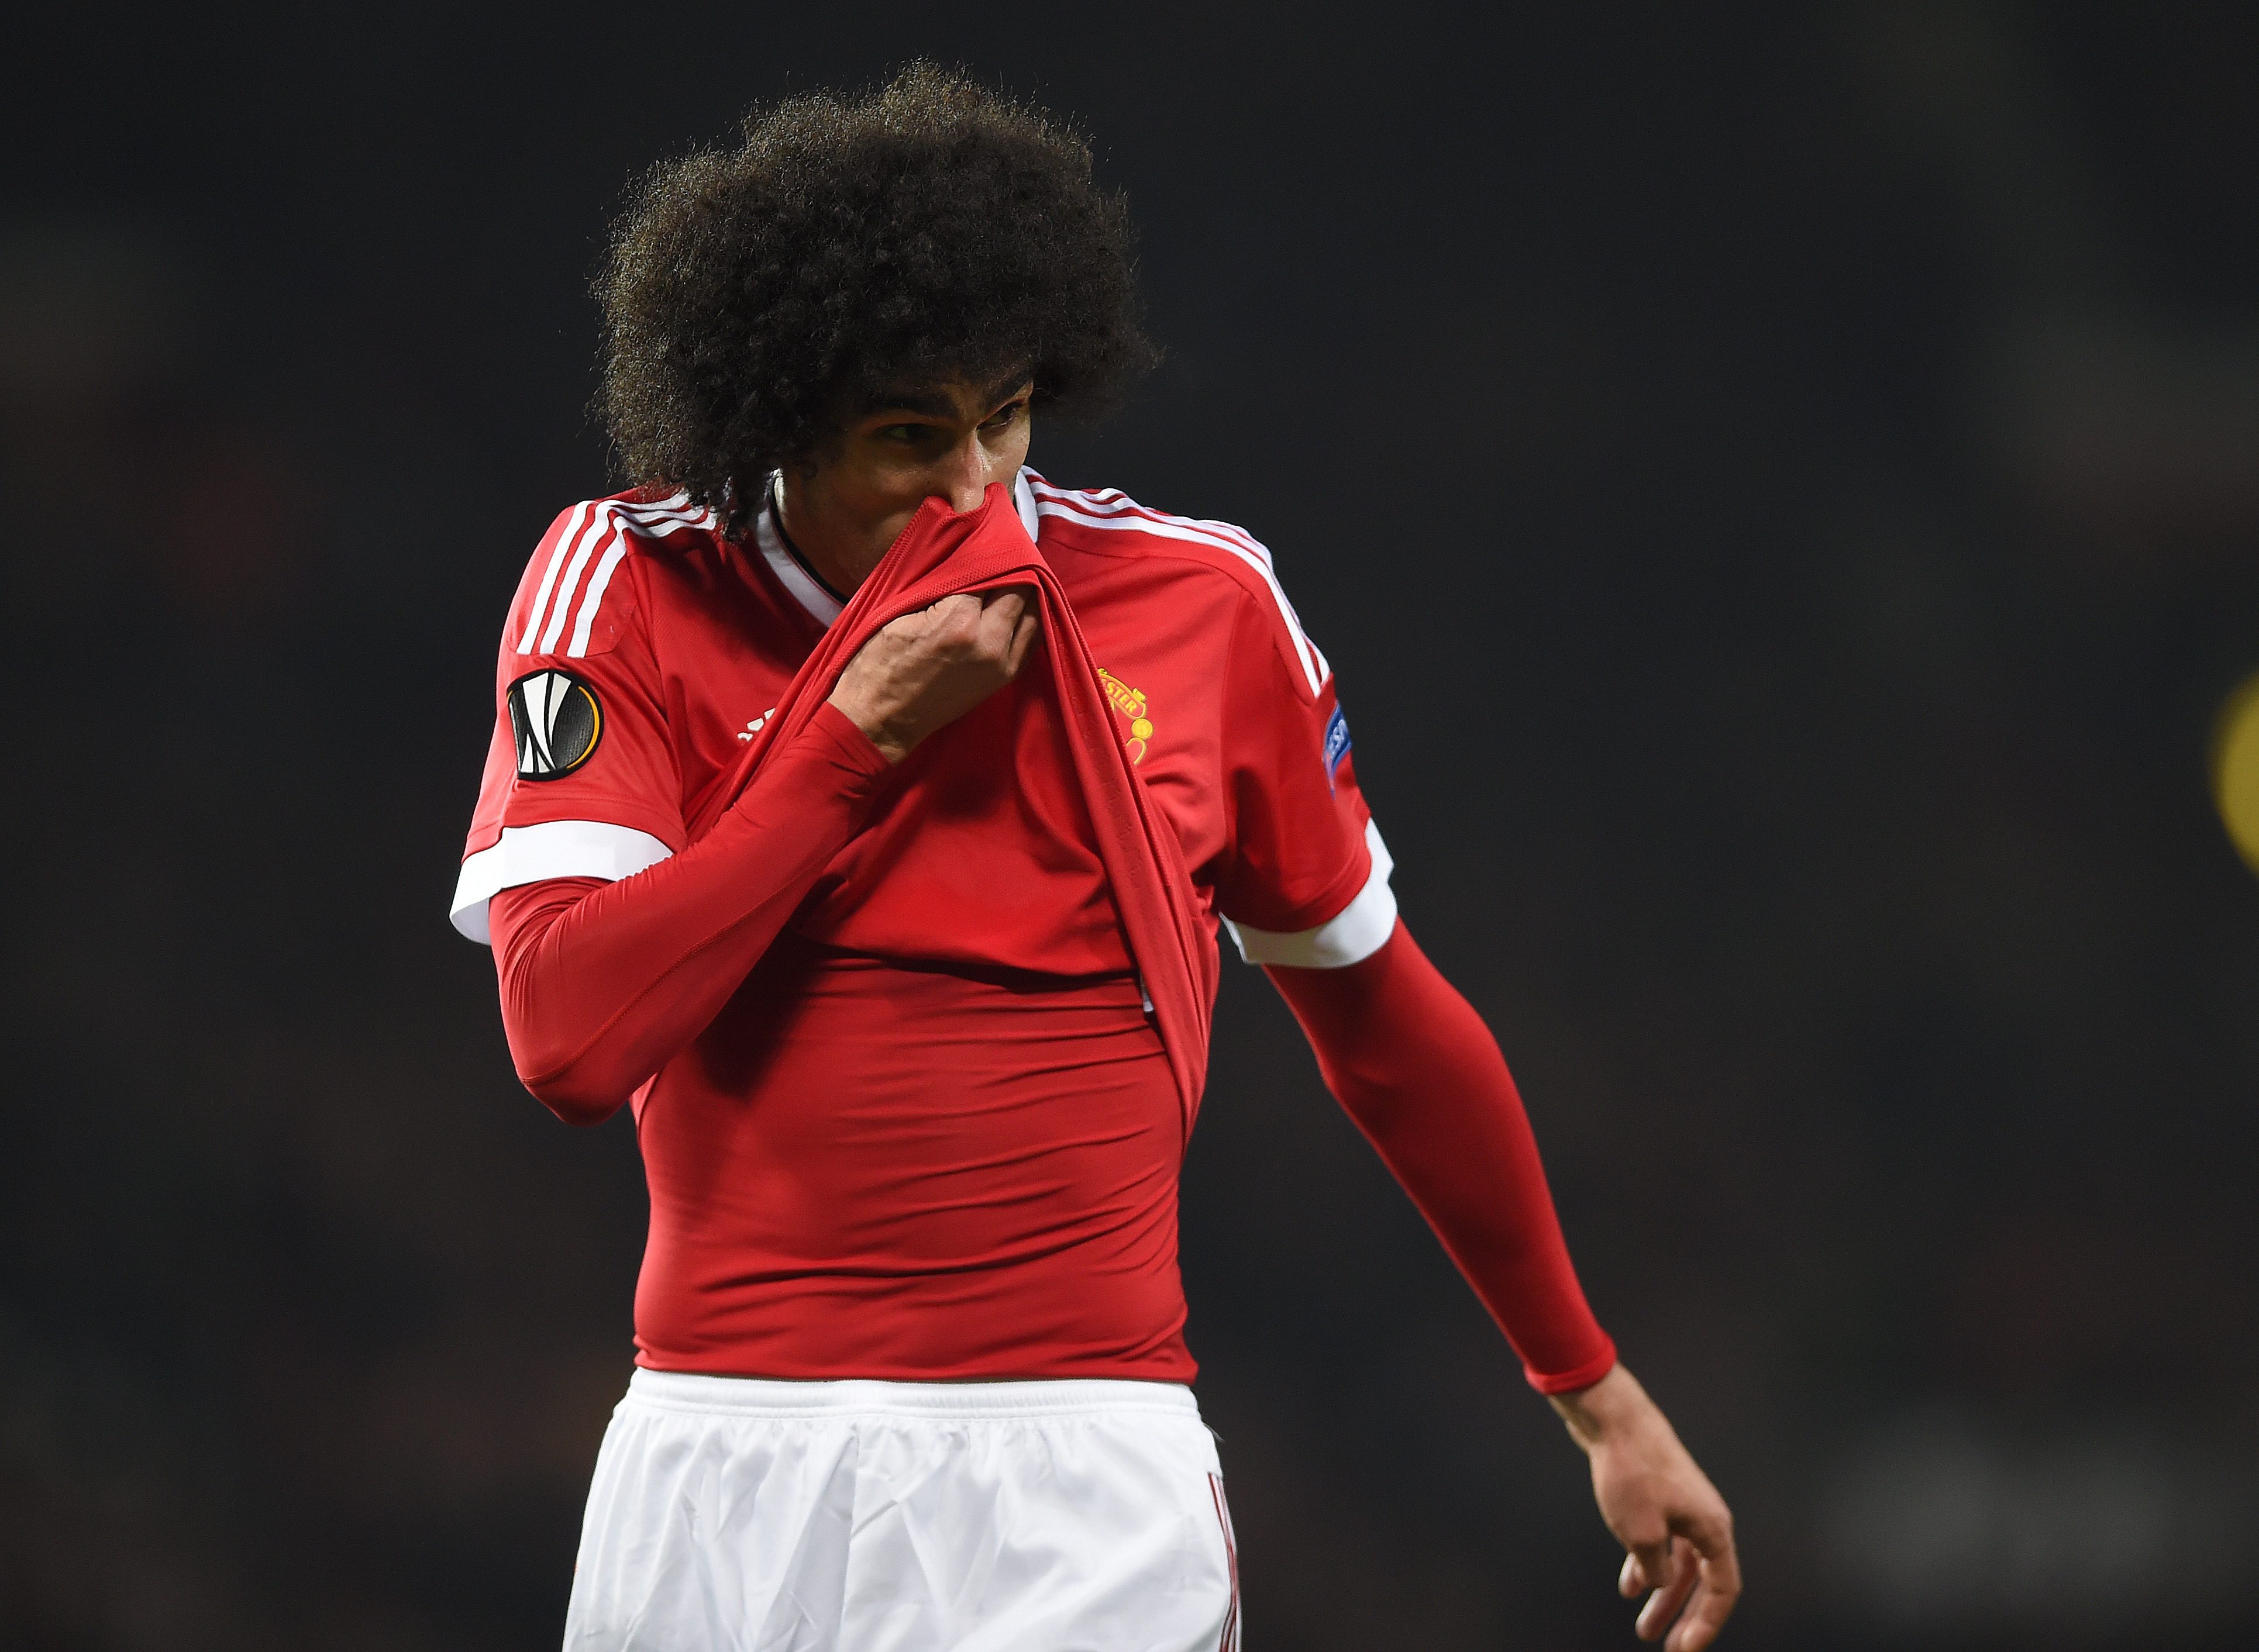 epa05217084 Manchester United's Marouane Fellaini reacts during the UEFA Europa League round of 16 soccer match between Manchester United and Liverpool at Old Trafford in Manchester, Britain, 17 March 2016.  EPA/PETER POWELL